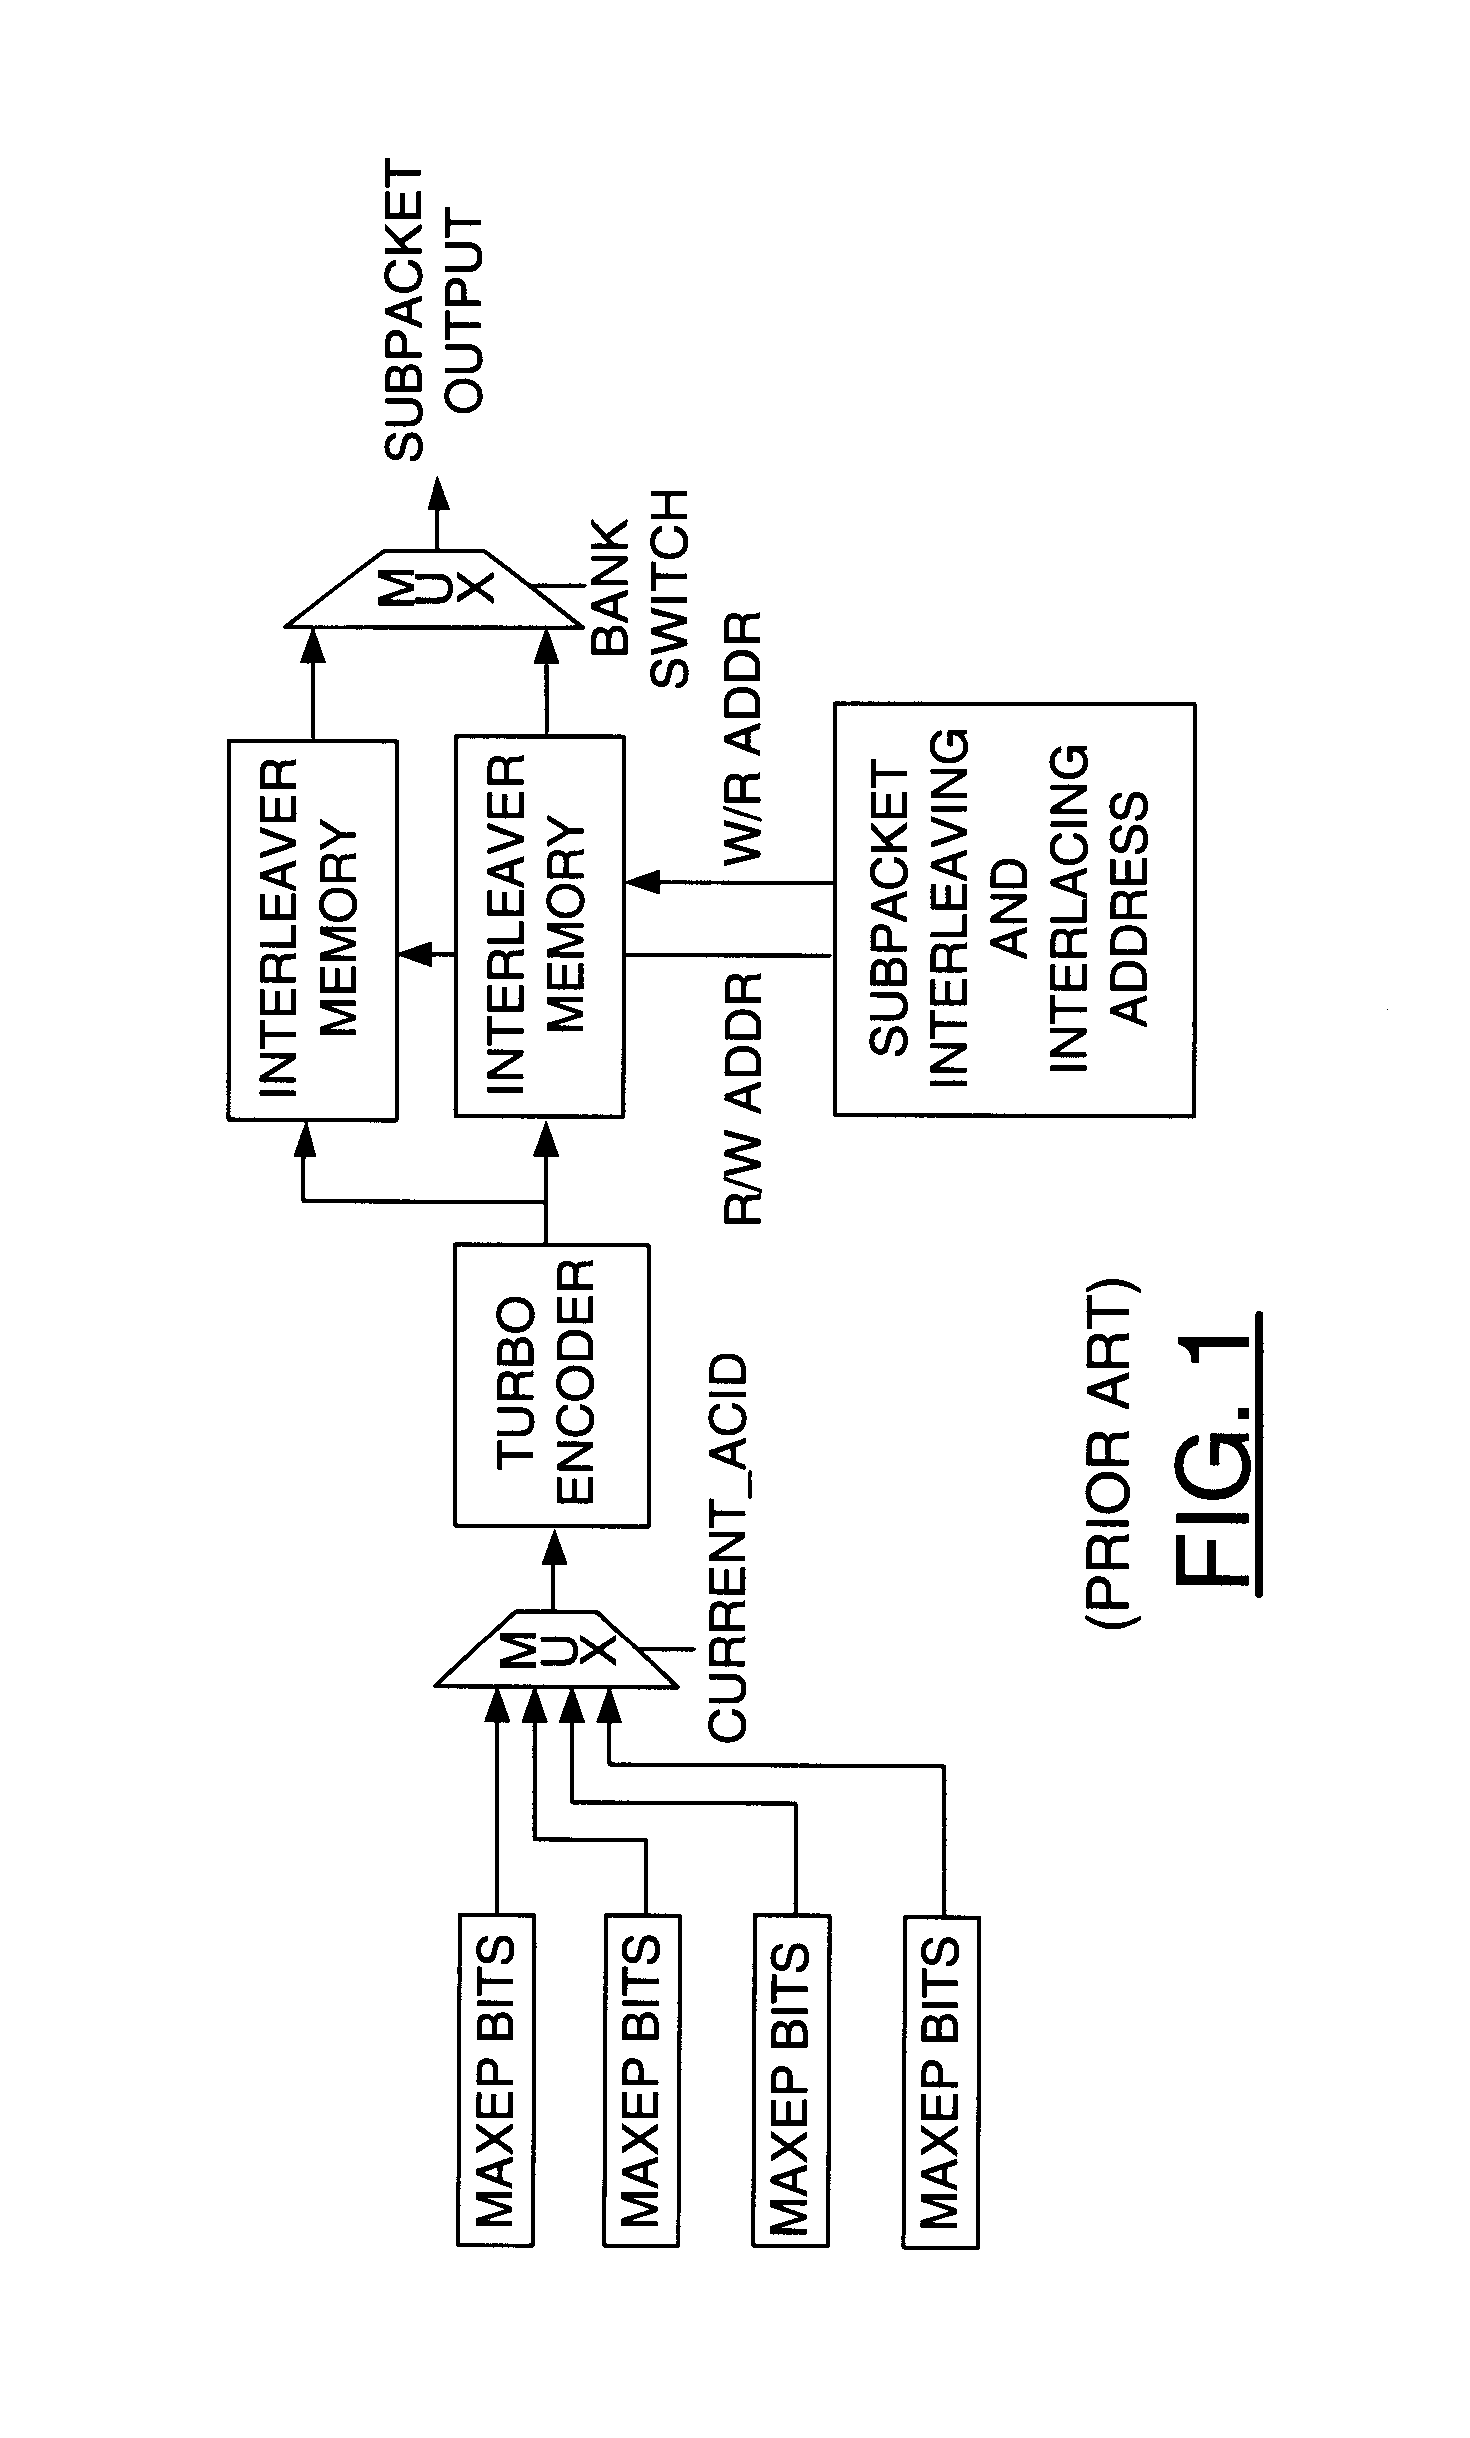 Memory efficient streamlined transmitter with a multiple instance hybrid ARQ